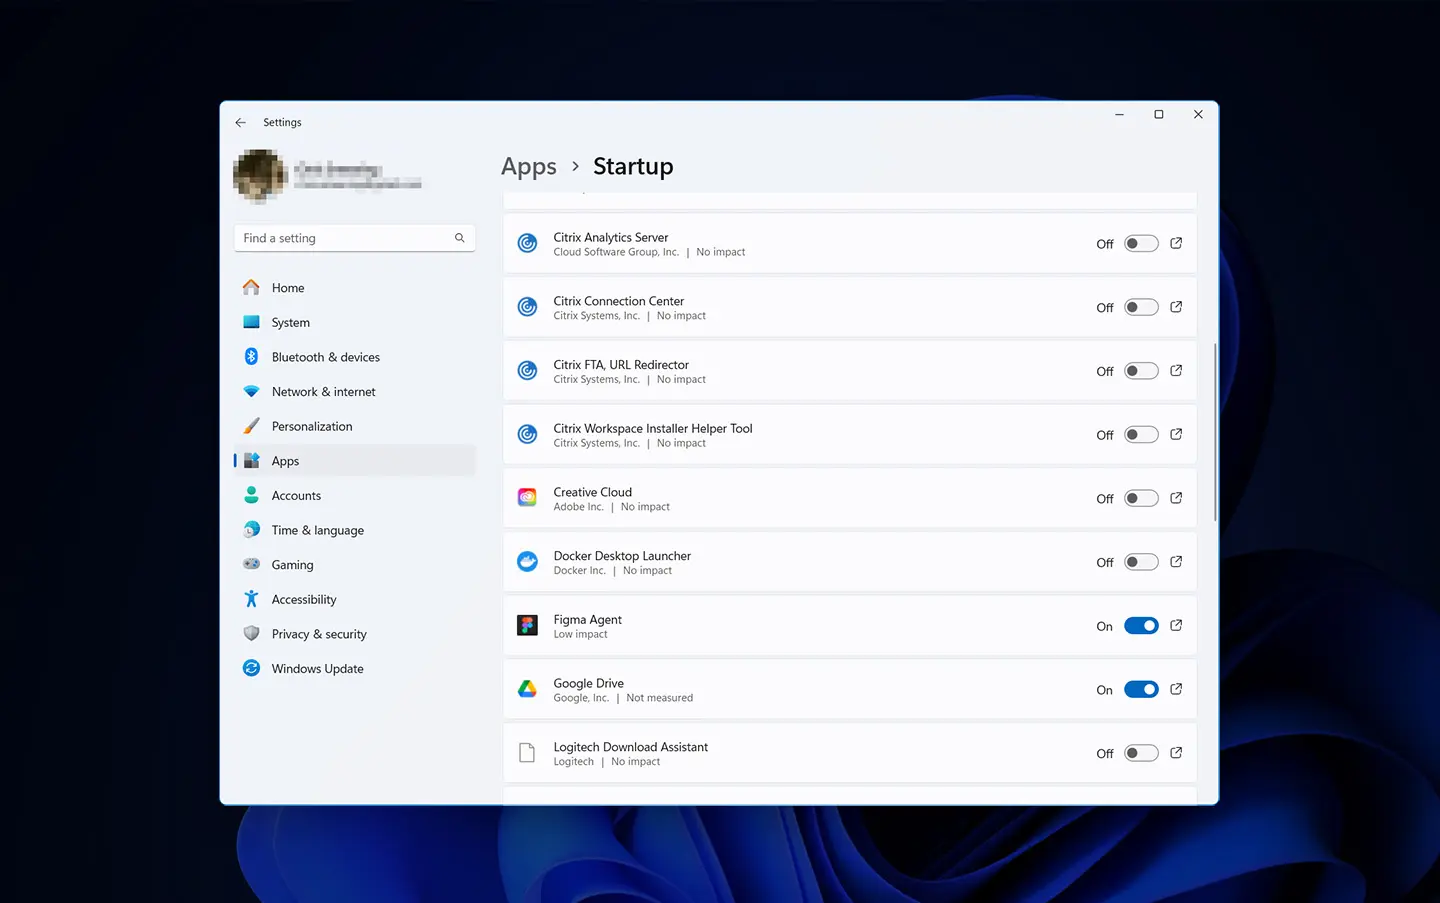 Screenshot of startup apps in Windows PC